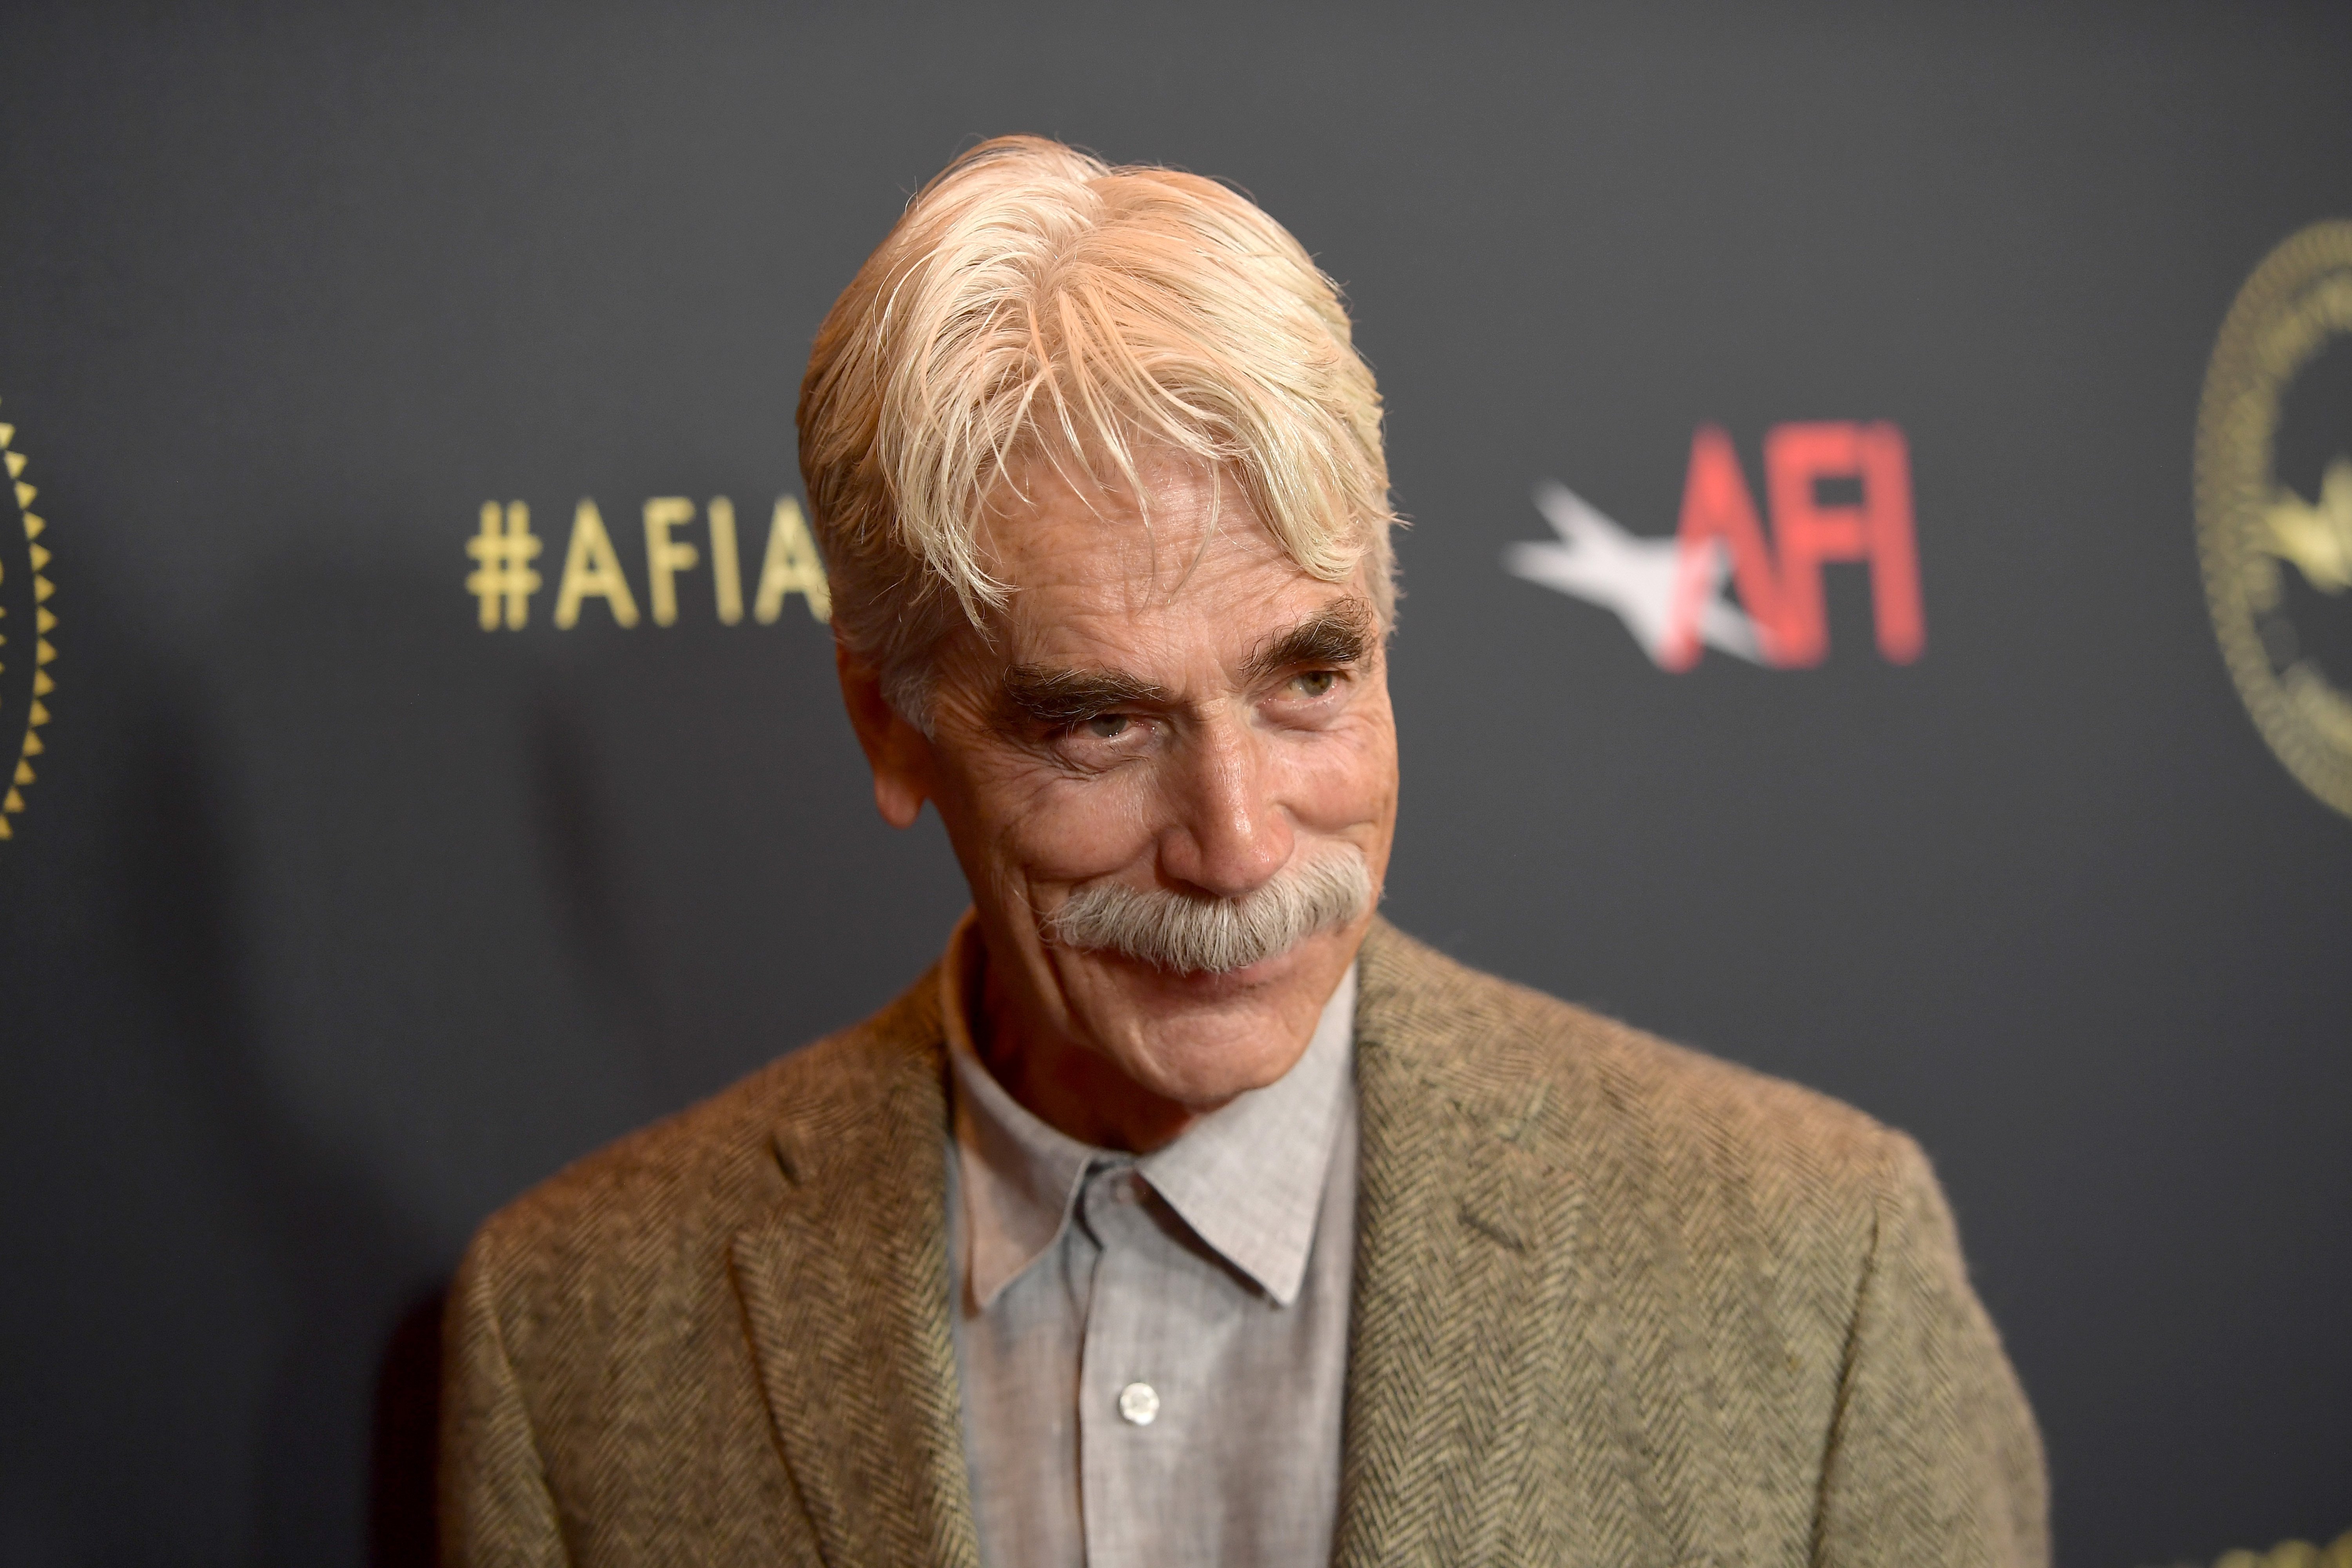 Sam Elliott at the 19th Annual AFI Awards on January 4, 2019 | Photo: GettyImages